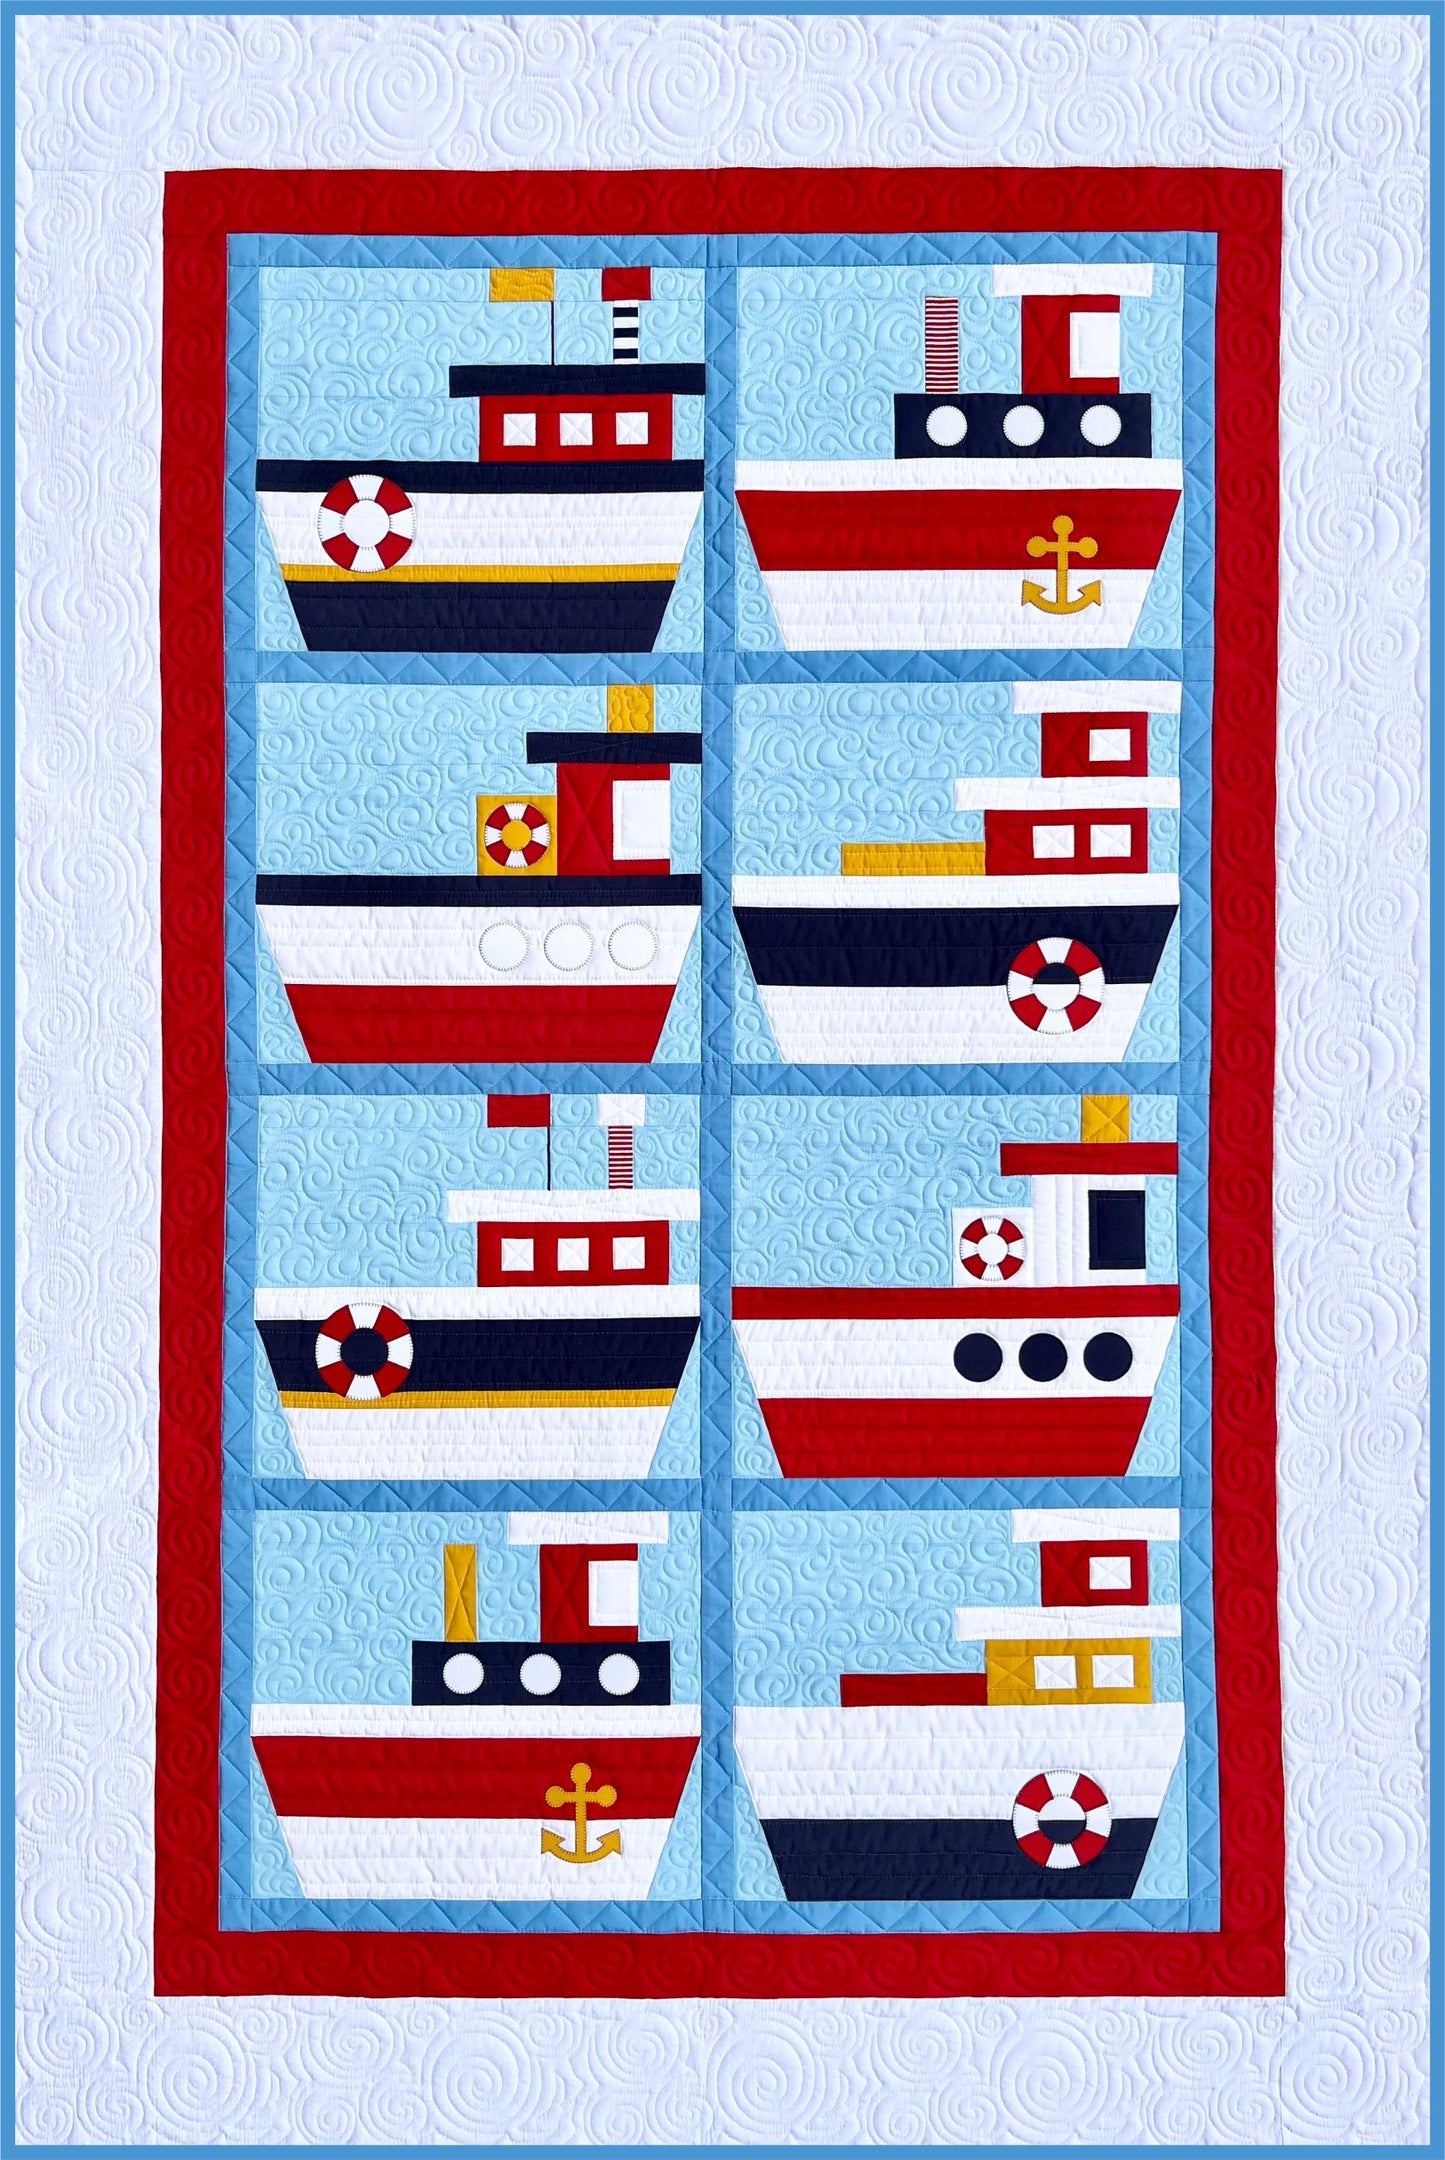 Tugboats Download Pattern